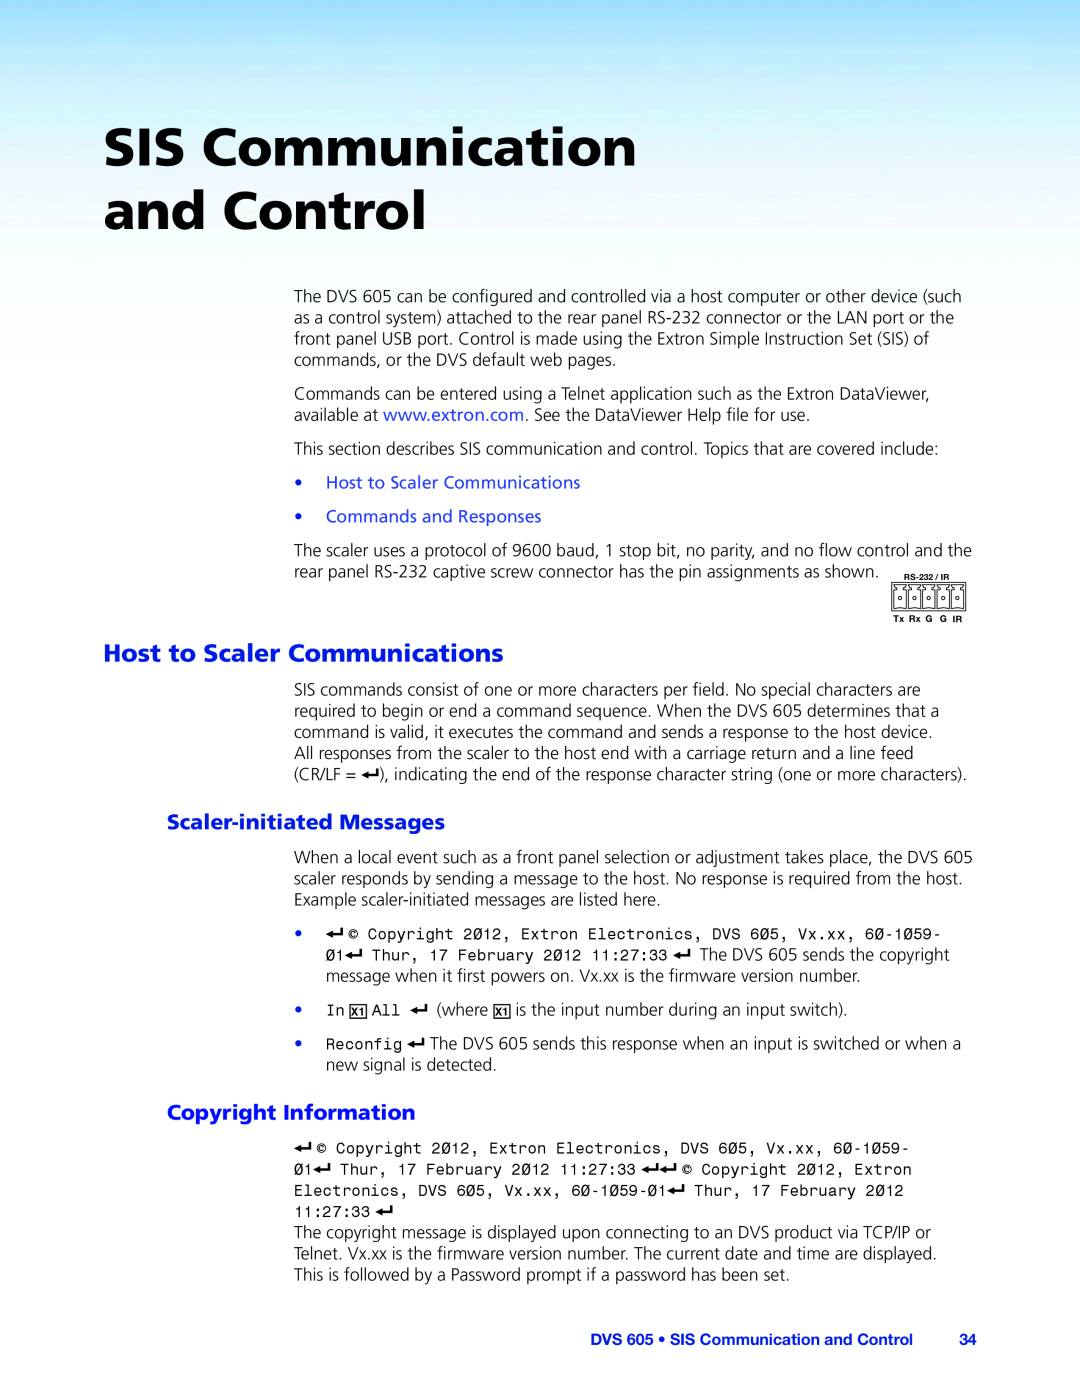 Extron electronic DVS 605 manual SIS Communication and Control, Copyright Information, Host to Scaler Communications 